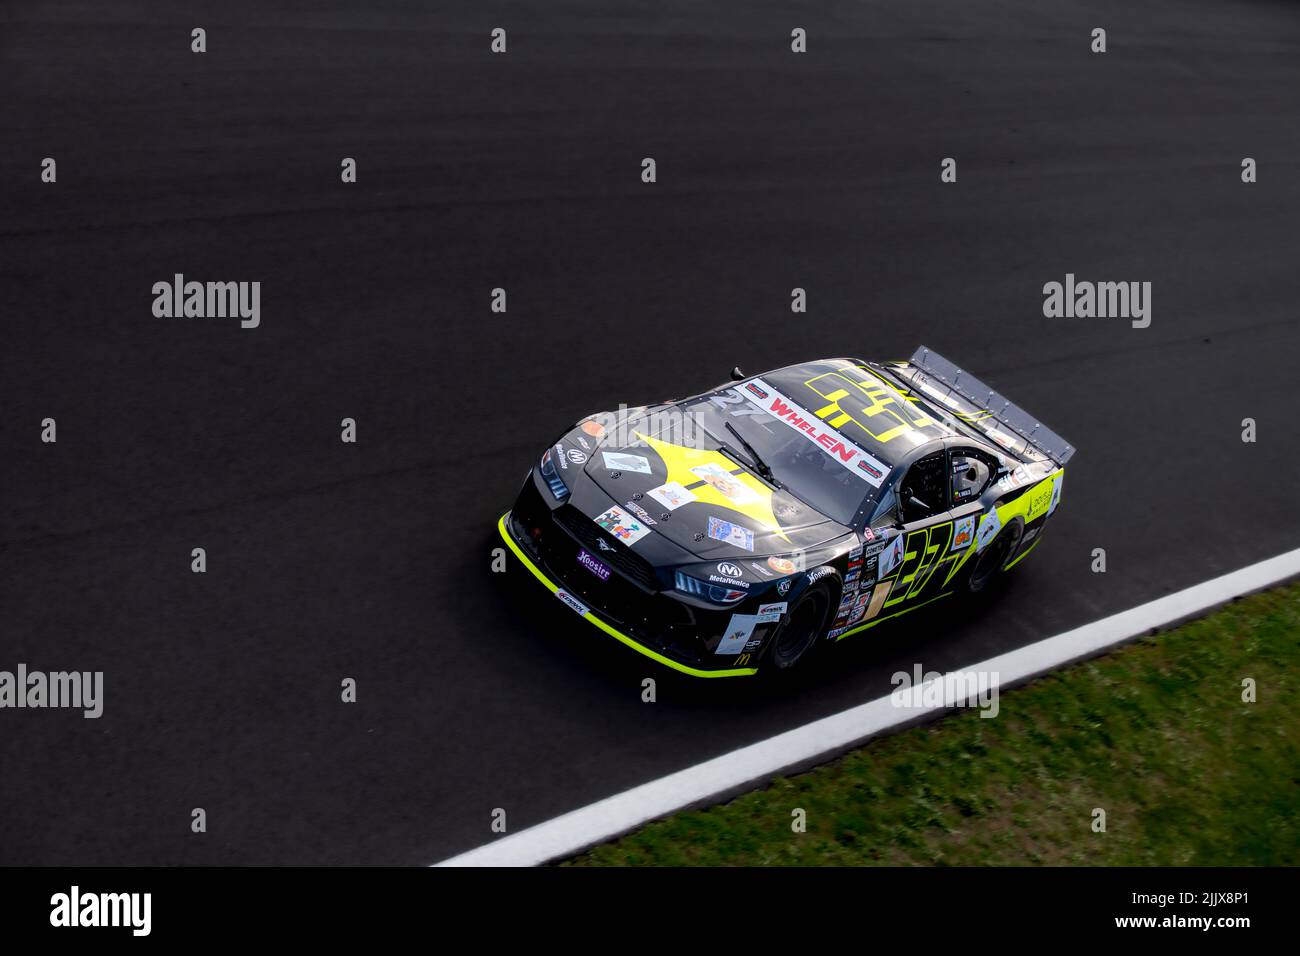 Nascar car action high angle view on asphalt racetrack. Vallelunga, Italy, october 29 2021, American festival of Rome Stock Photo